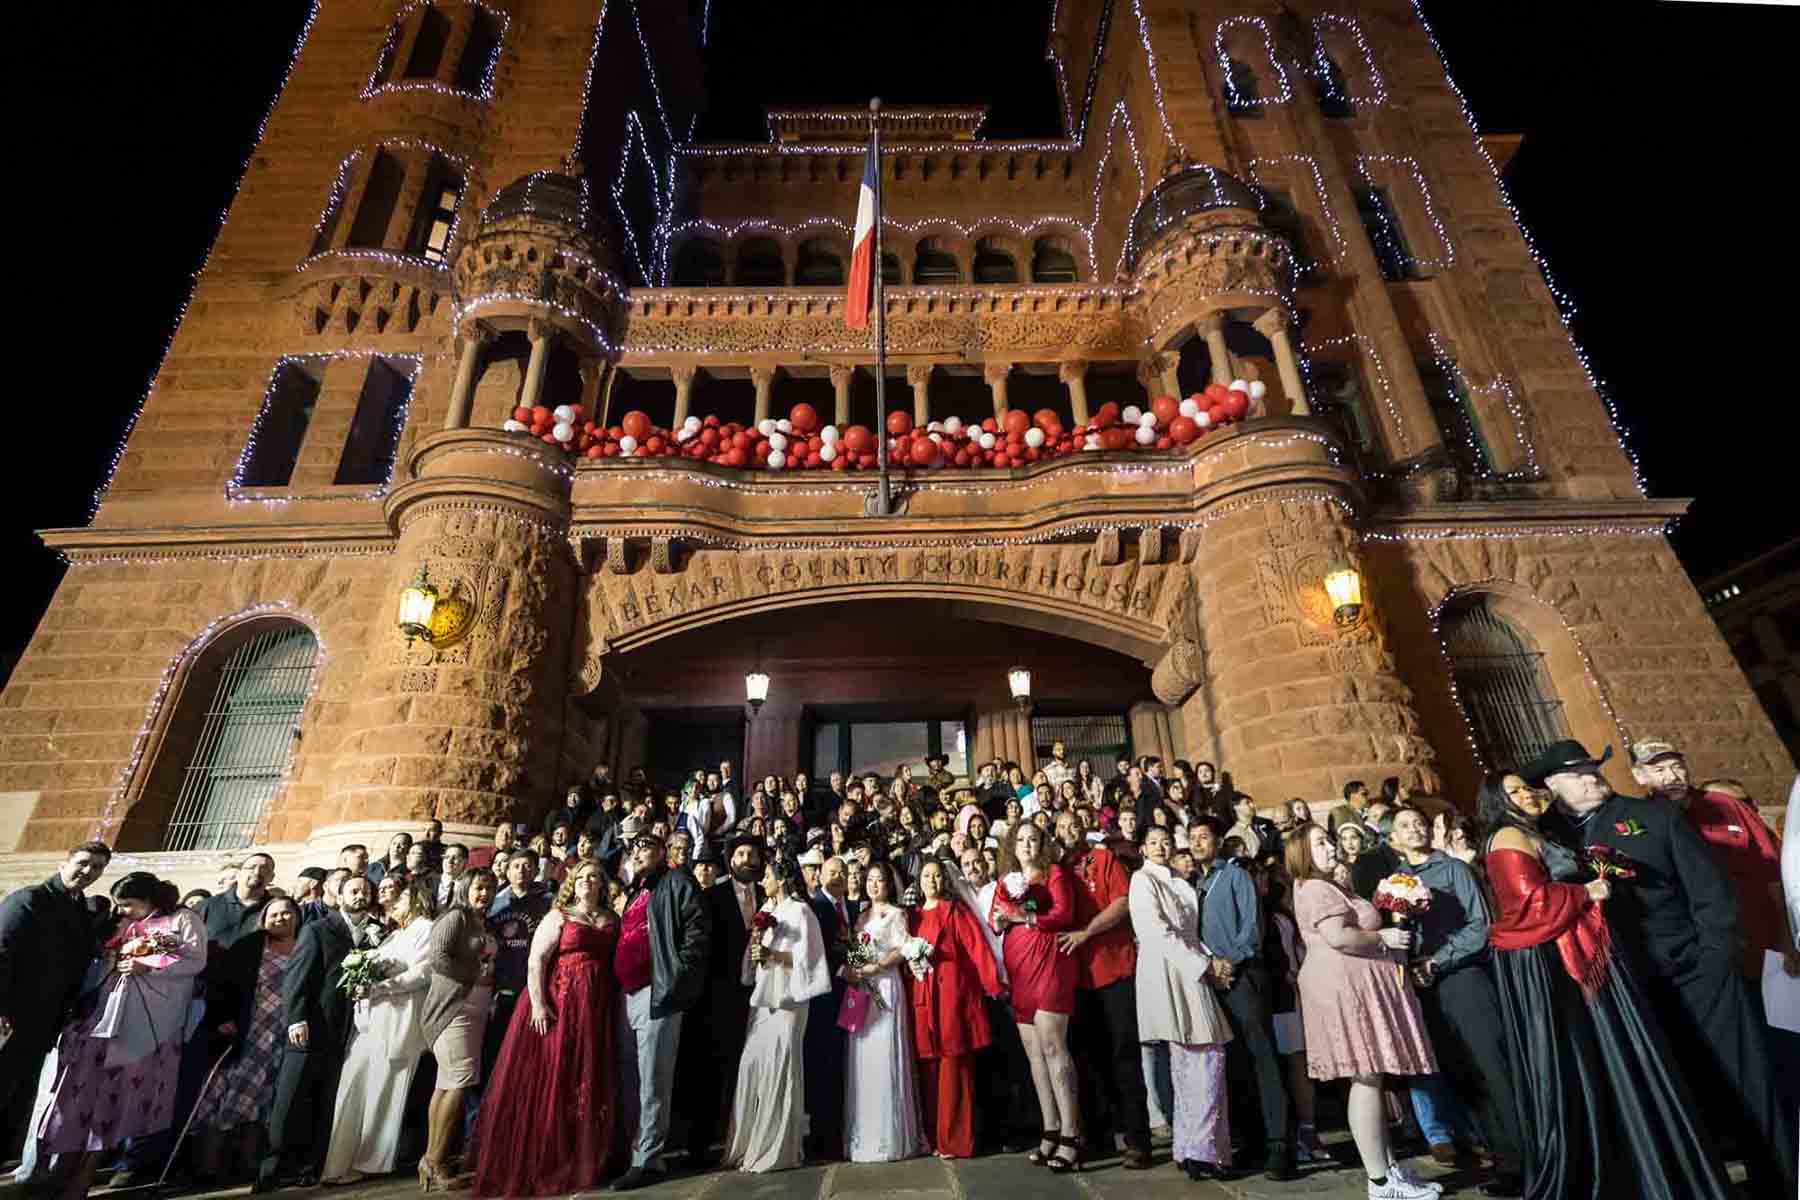 Couples standing in front of the Bexar County Courthouse at night for an article on the Bexar county mass wedding event